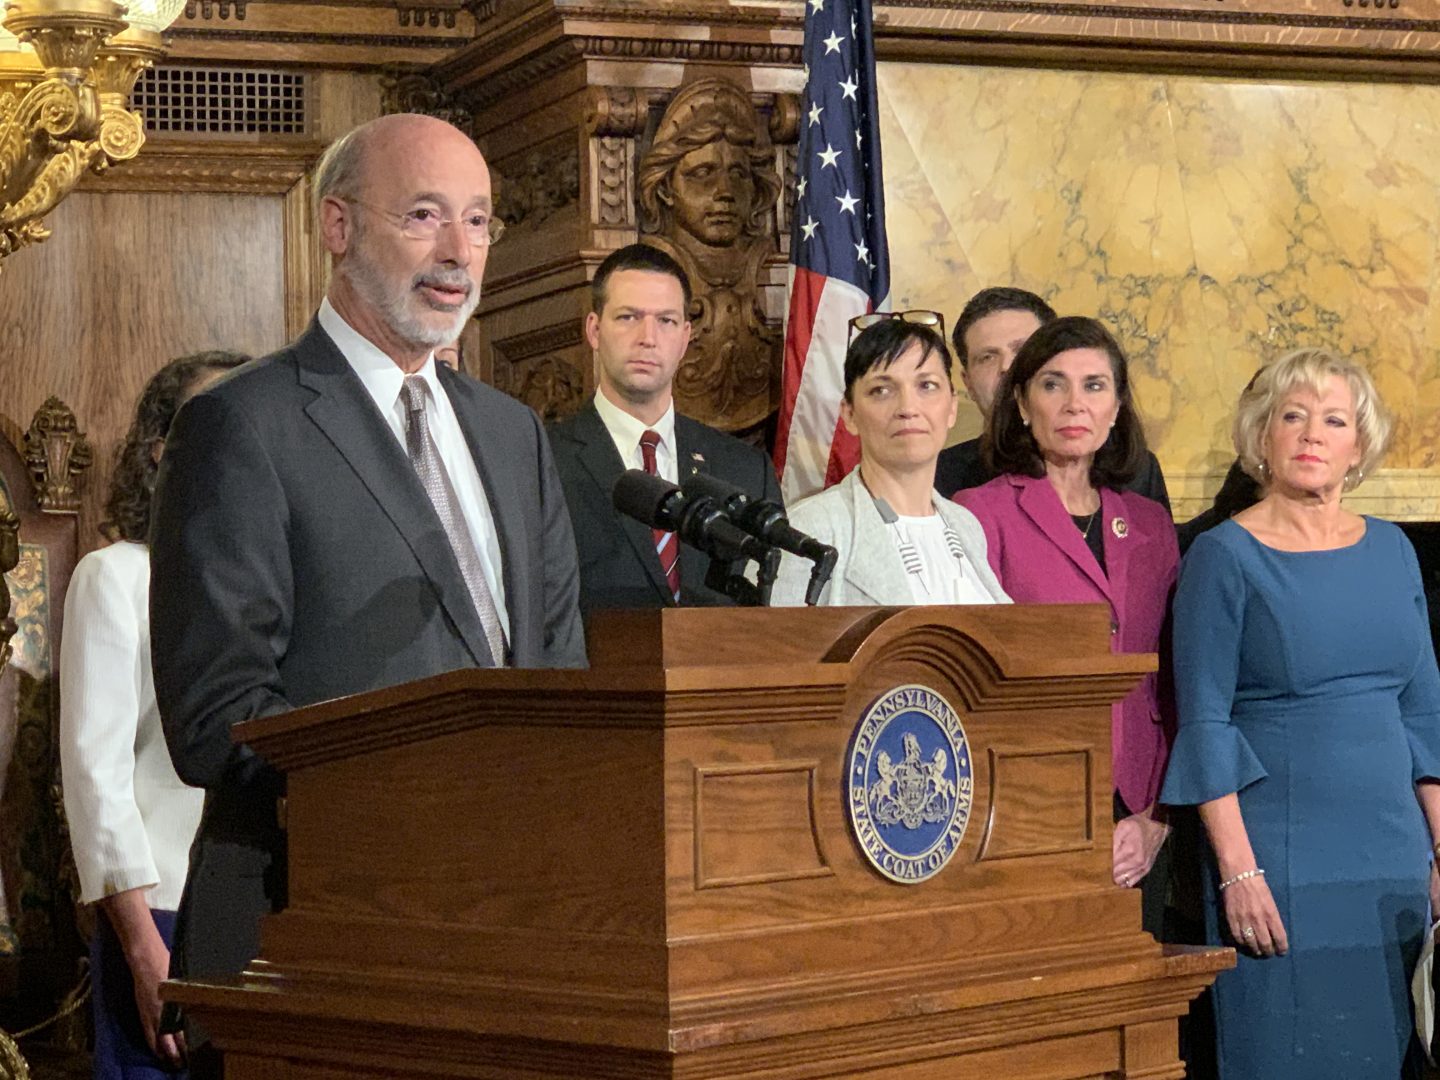 Gov. Tom Wolf signs election reforms law Act 77 into effect Thursday during a ceremony alongside supporters including sponsor state Sen. Lisa Boscola, D-Lehigh/Northampton (far right). 